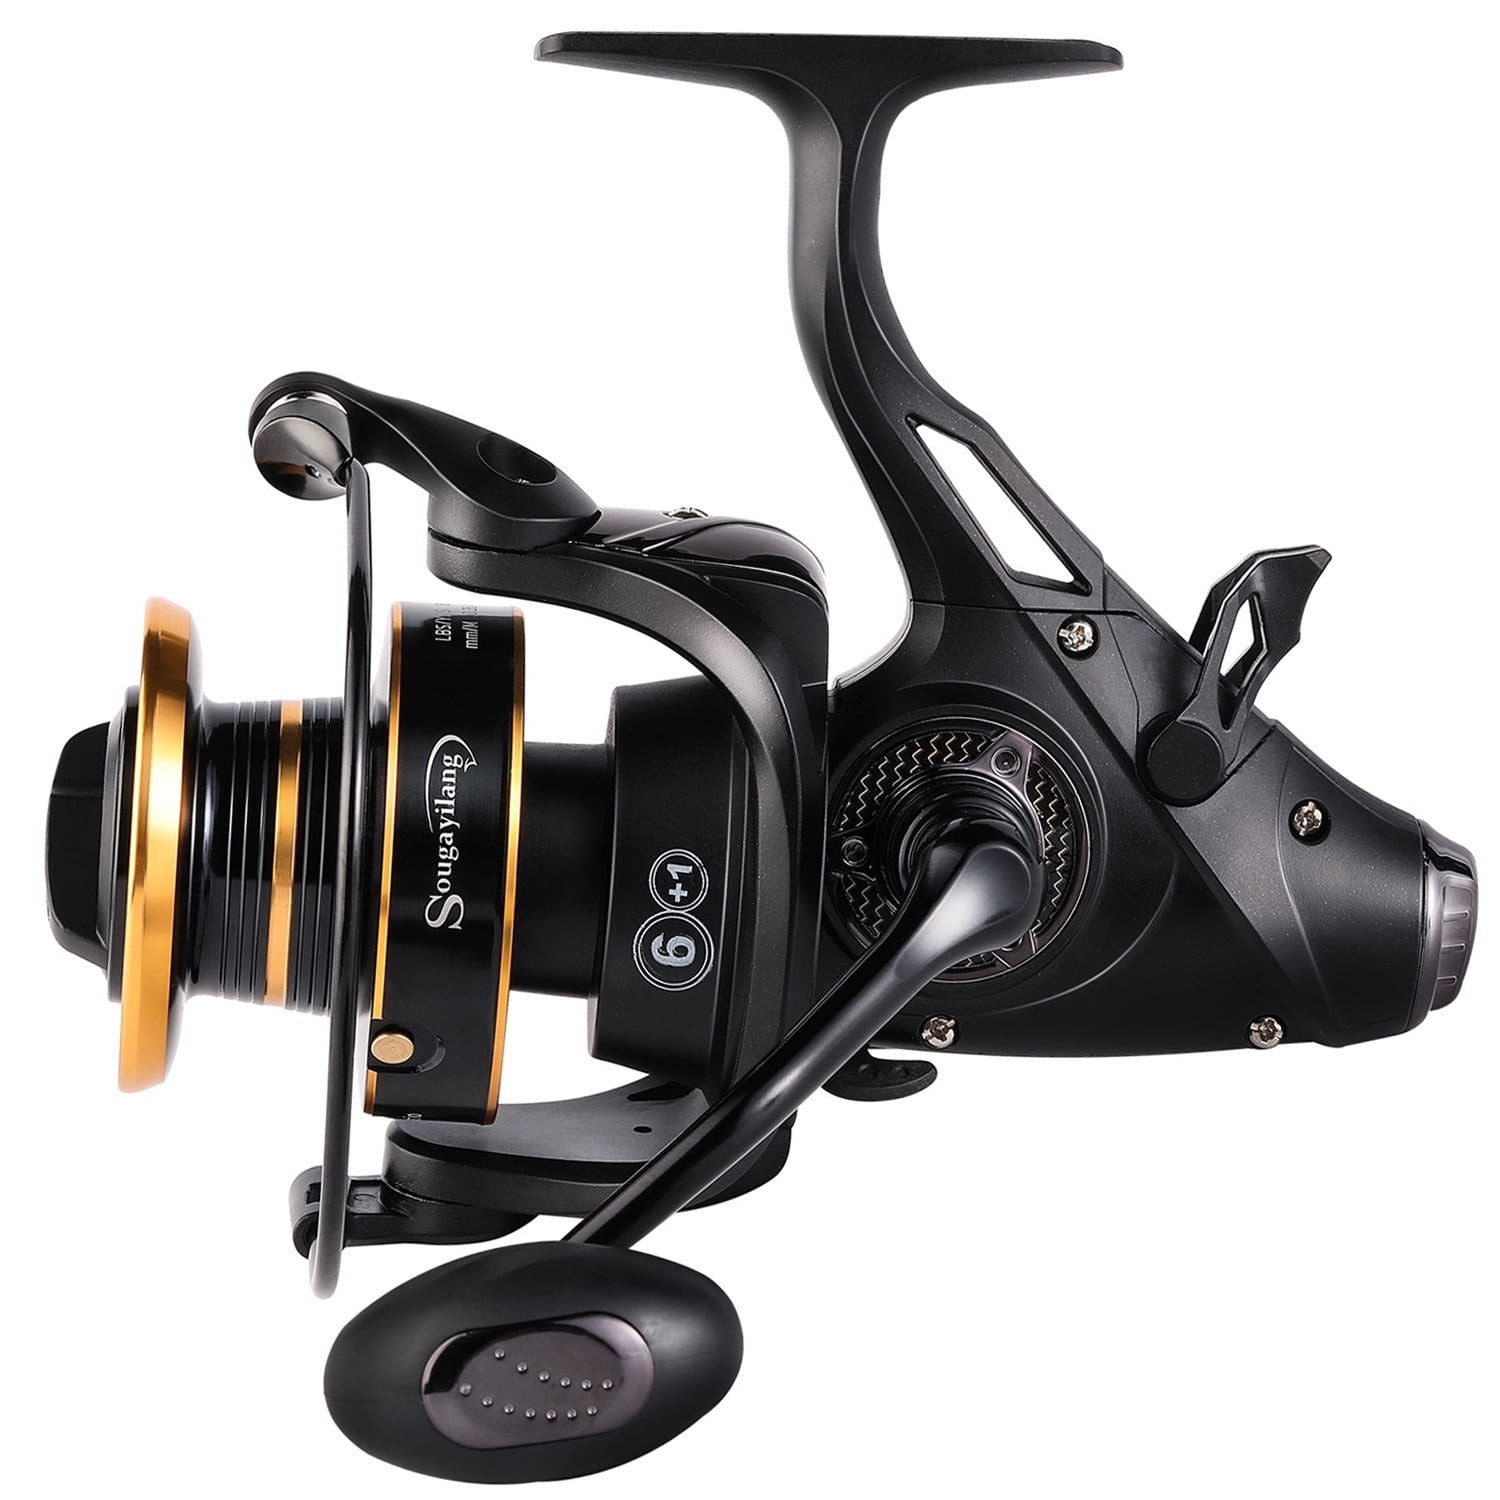 Yosoo Metal Lure Fishing Reel, 5.0:1 Speed Ratio Lightweight Fluent Drag Anti  Reverse Instant Lock Spinning Fishing Reel for Freshwater (SK1000) : . in: Sports, Fitness & Outdoors